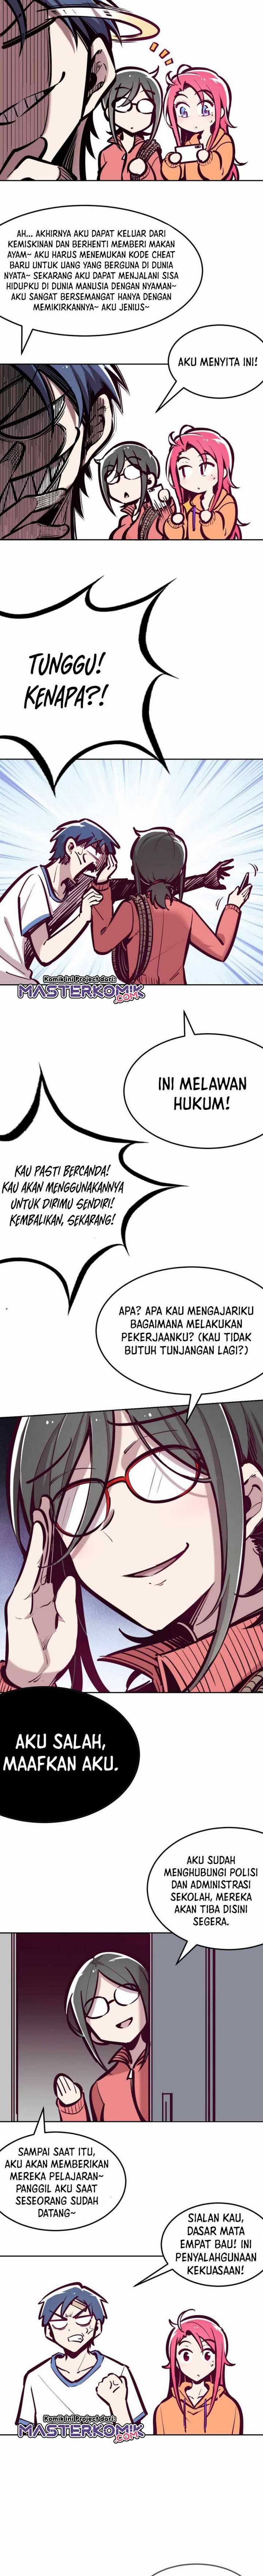 Demon X Angel, Can’t Get Along! Chapter 29